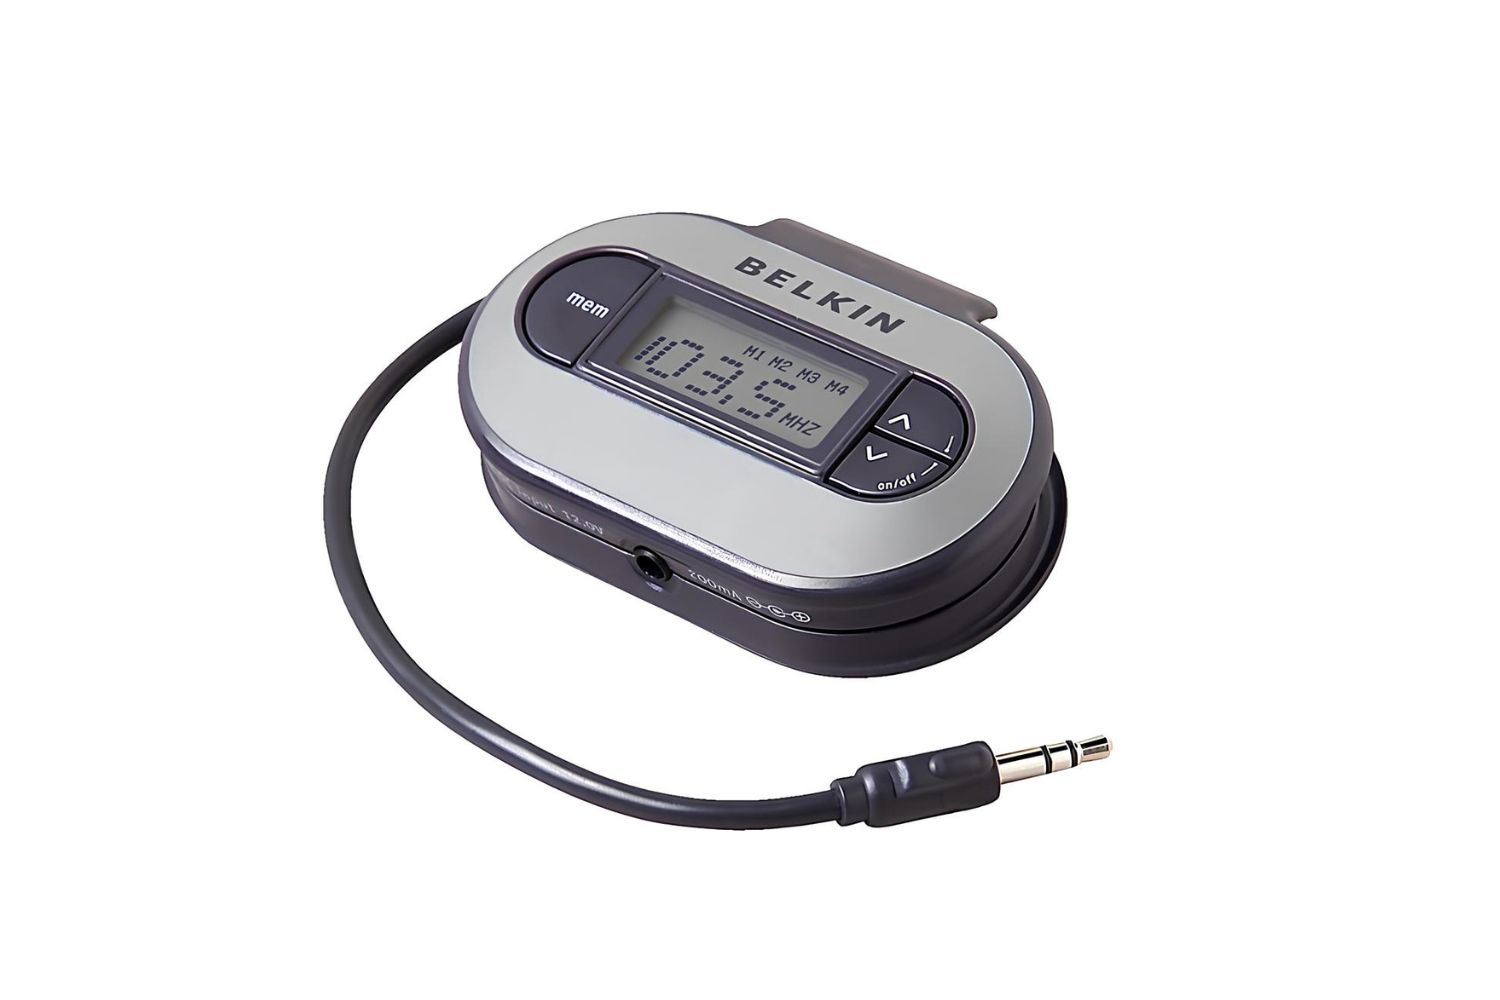 belkin-fm-transmitter-guide-maximizing-utility-with-easy-steps